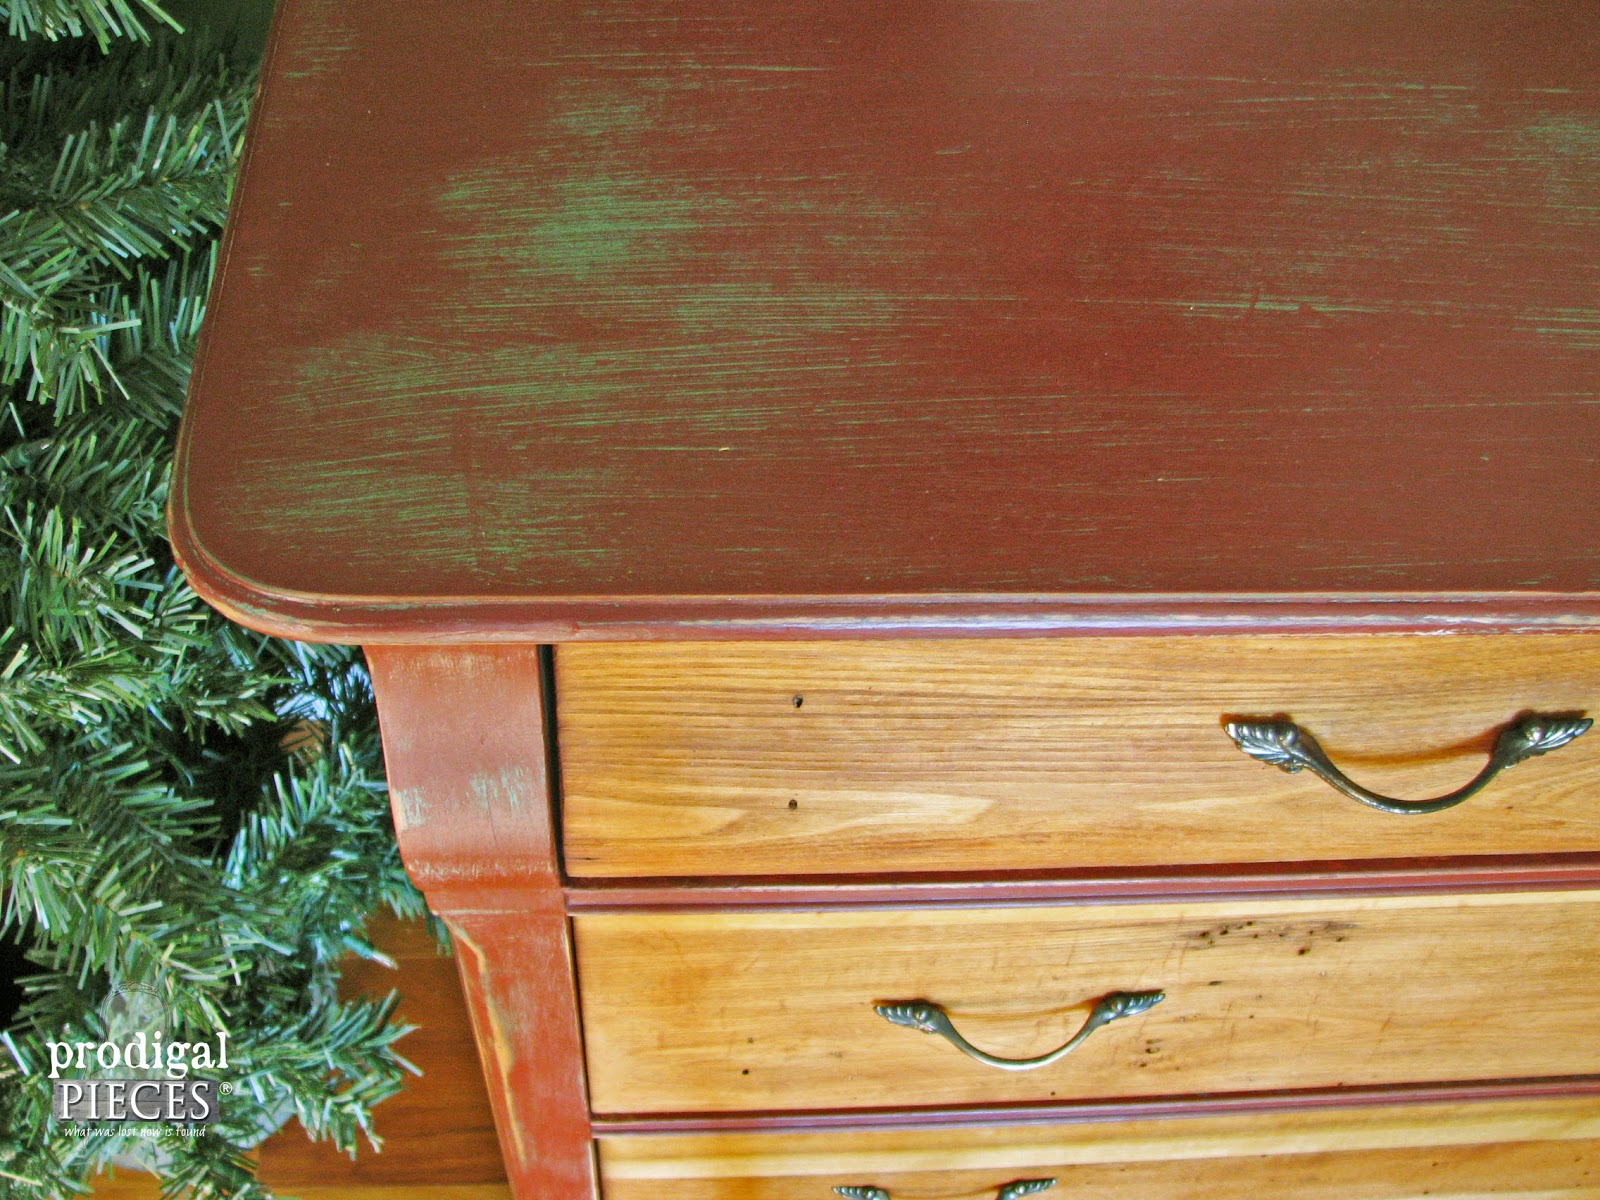 Themed Furniture Makeover Day ~ Rustic Red Farmhouse Cottage Chic Dresser by Prodigal Pieces www.prodigalpieces.com